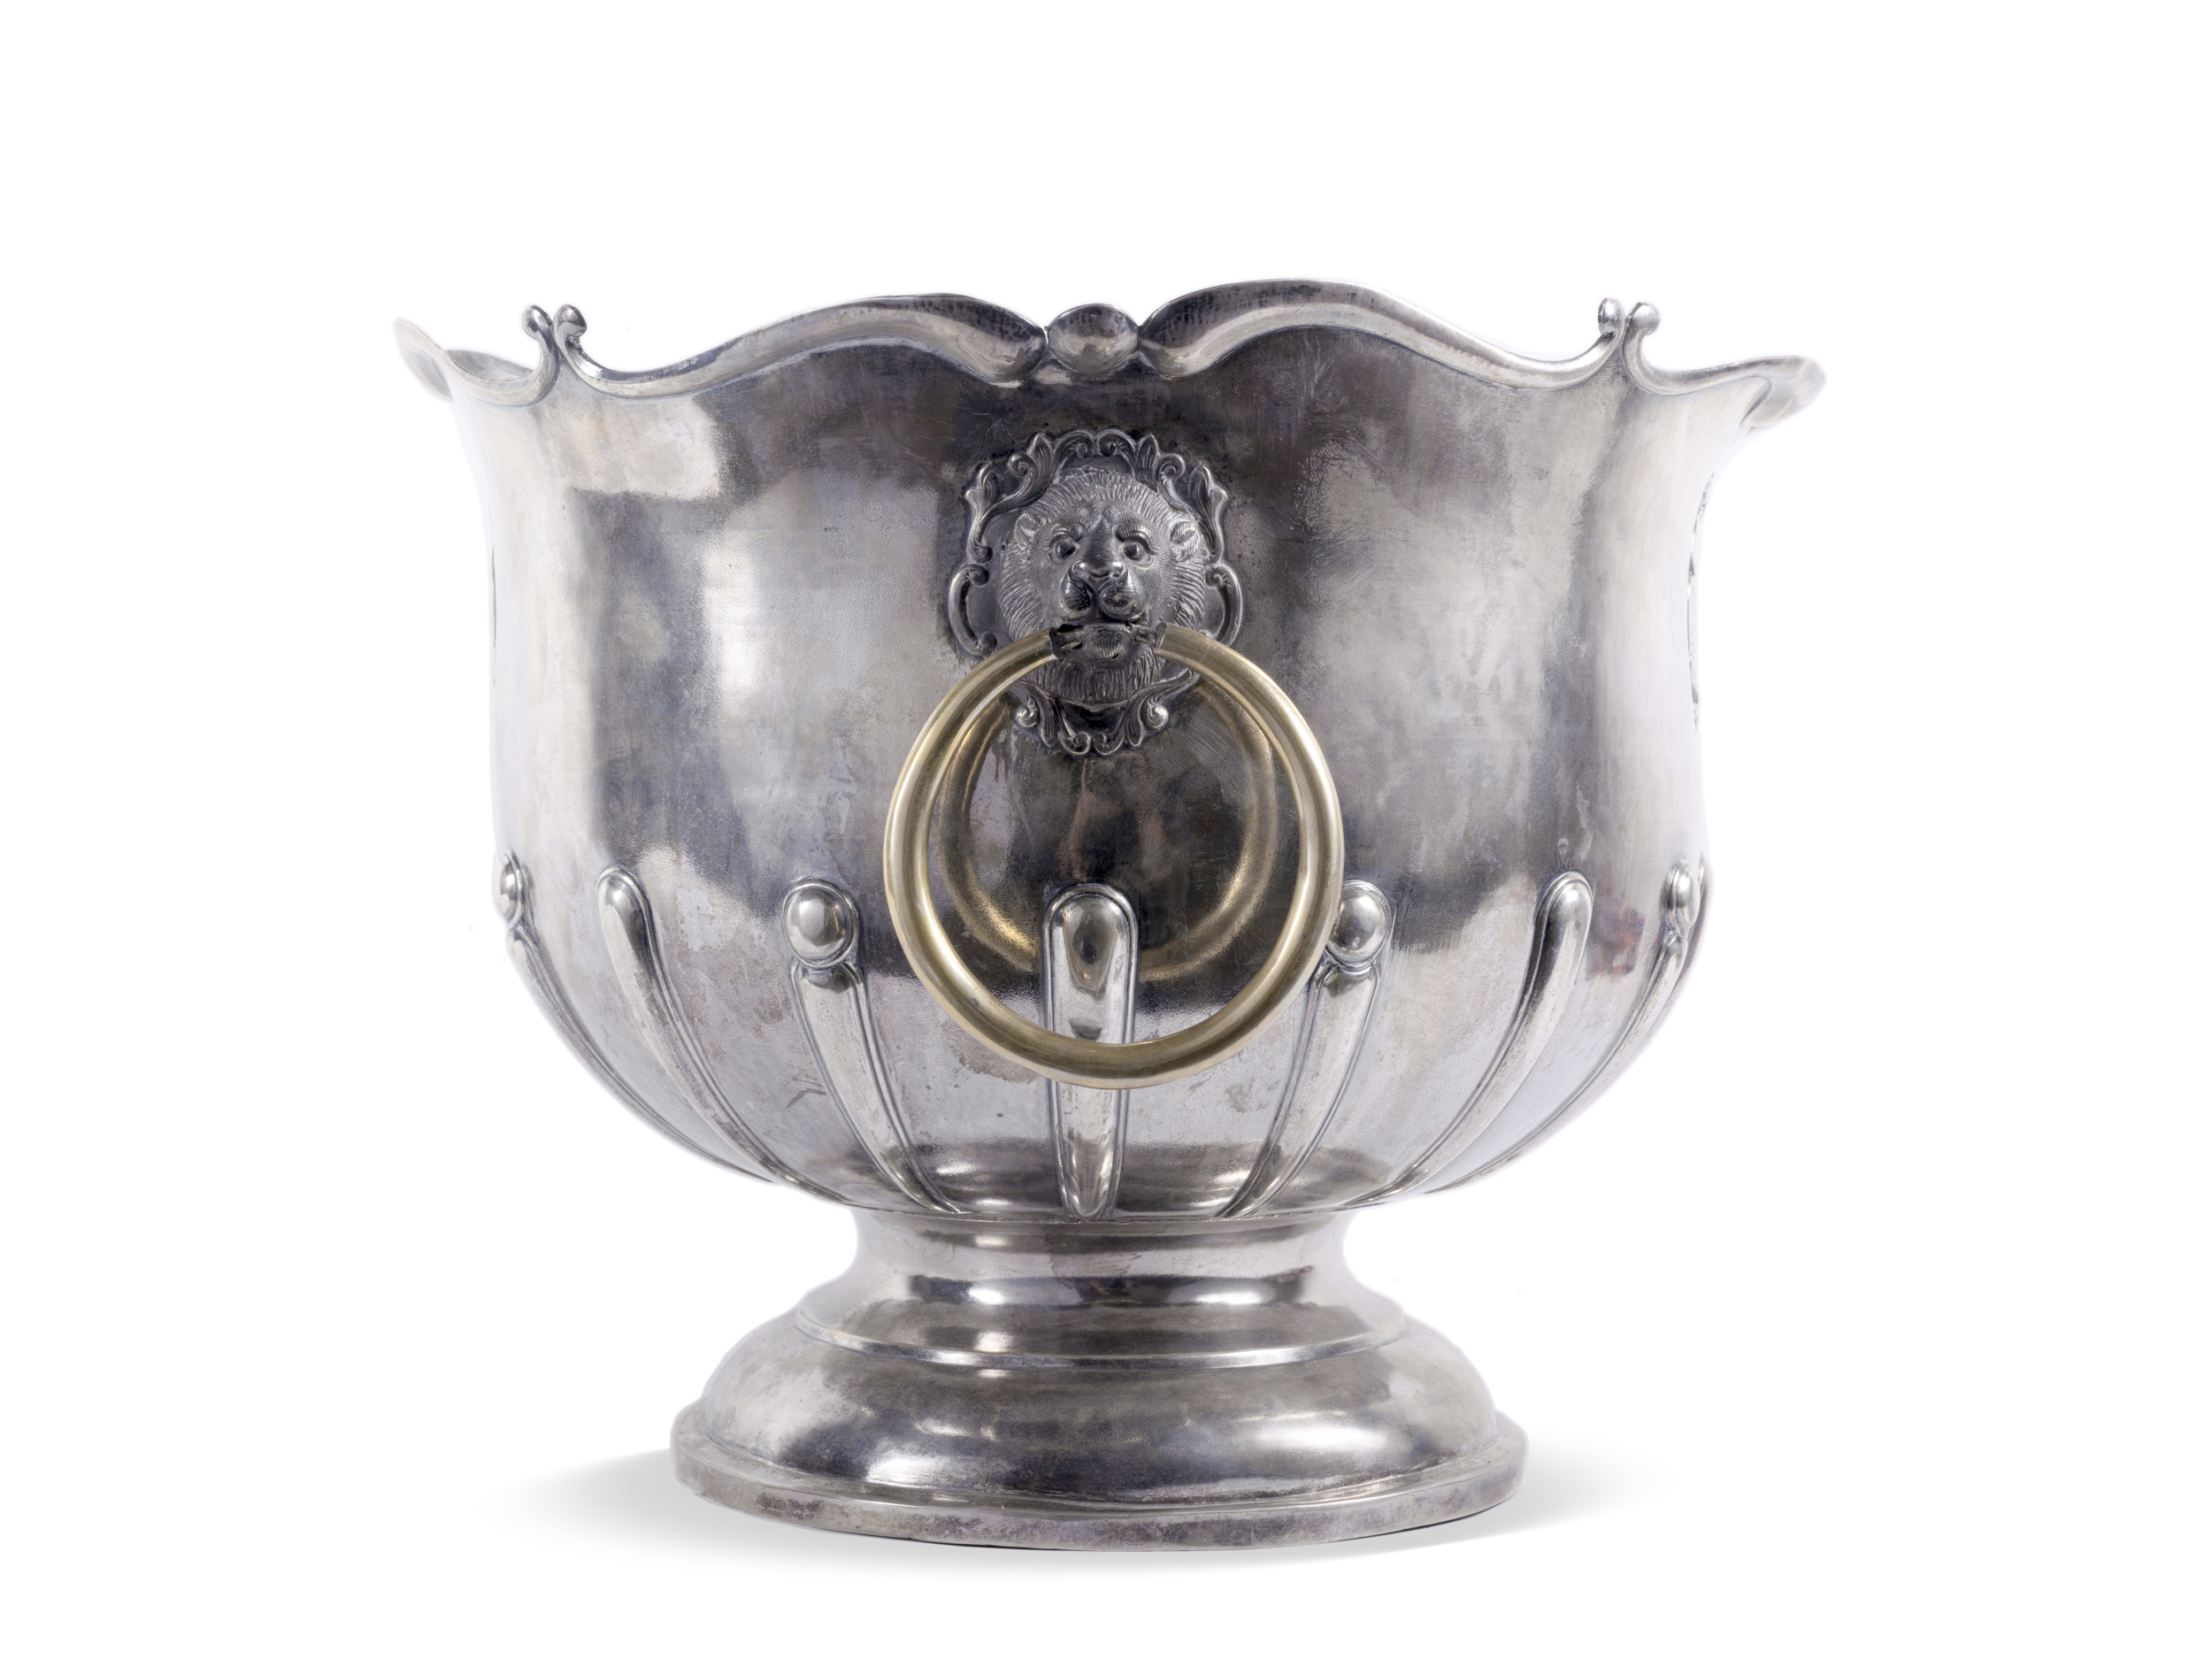 Exclusive champagne or wine cooler, 18th/19th century, Silver cast & chased - Image 2 of 9